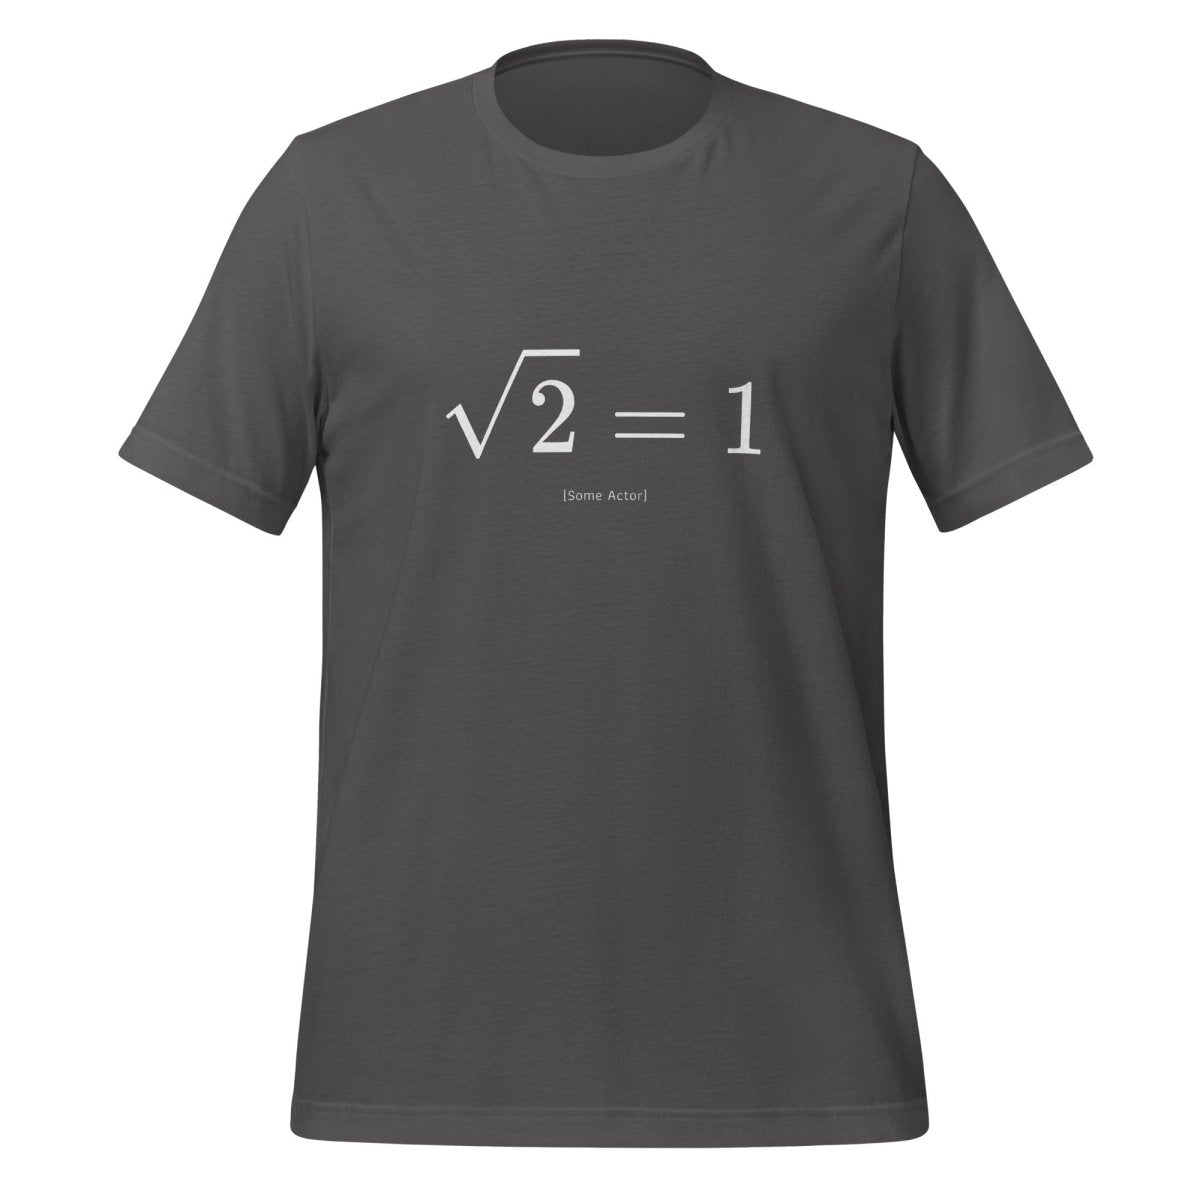 The Square Root of 2 Equals 1 T - Shirt (unisex) - Asphalt - AI Store